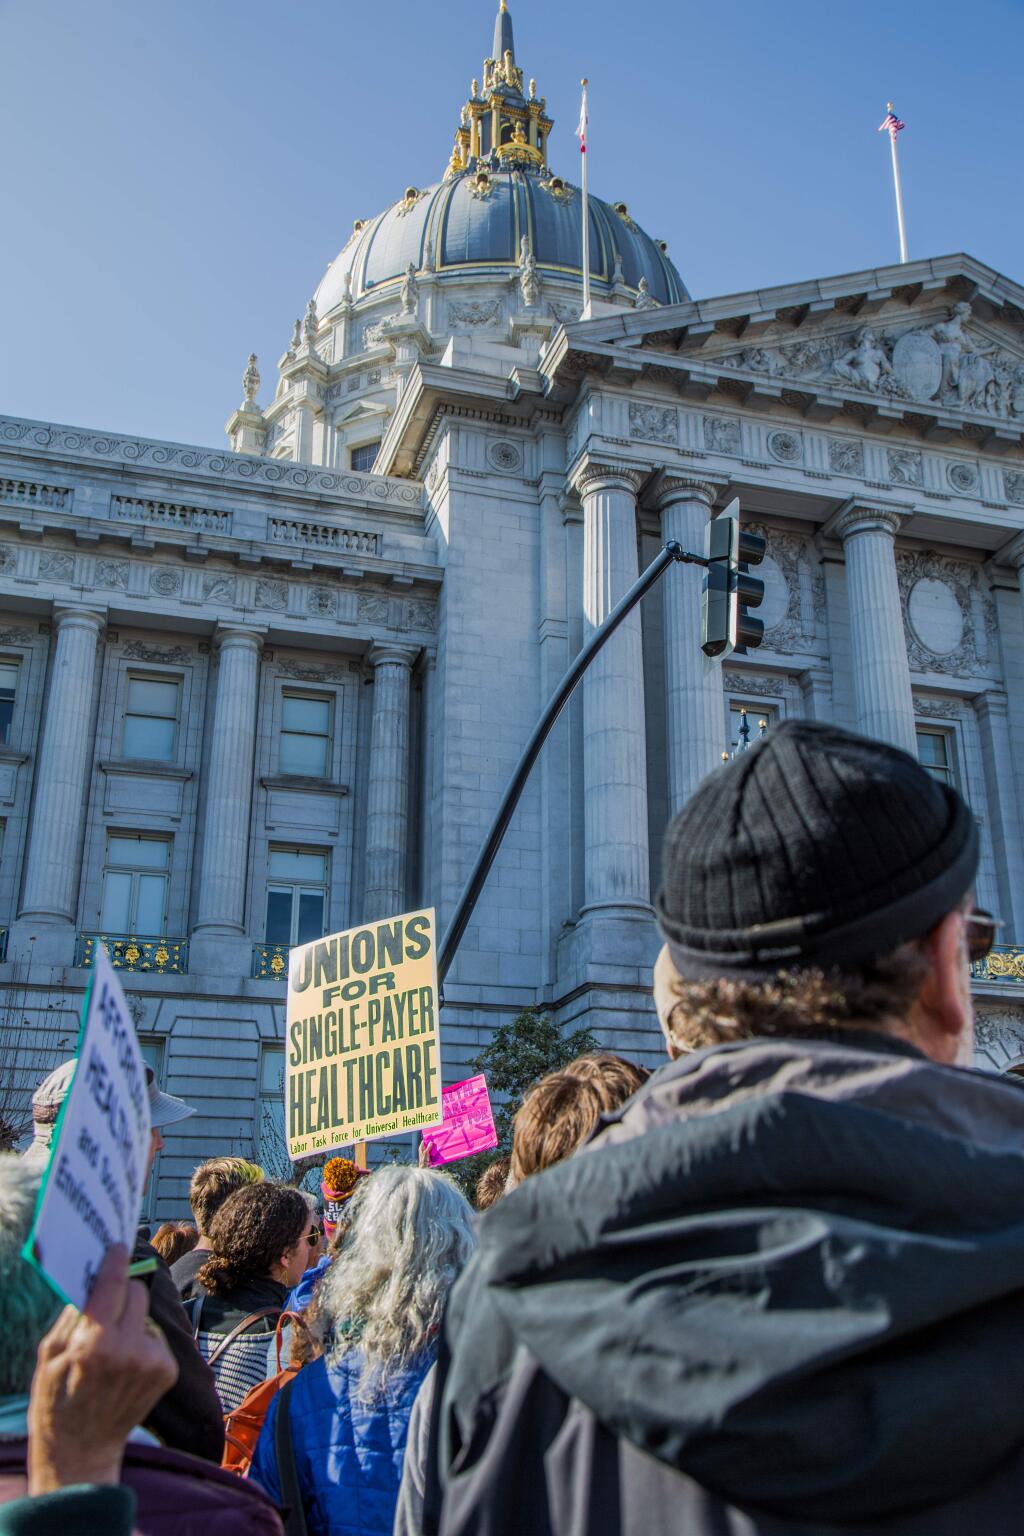 A person holds a sign during a healthcare rally held in front of city hall in downtown San Francisco January 15, 2017. (Shutterstock.com)